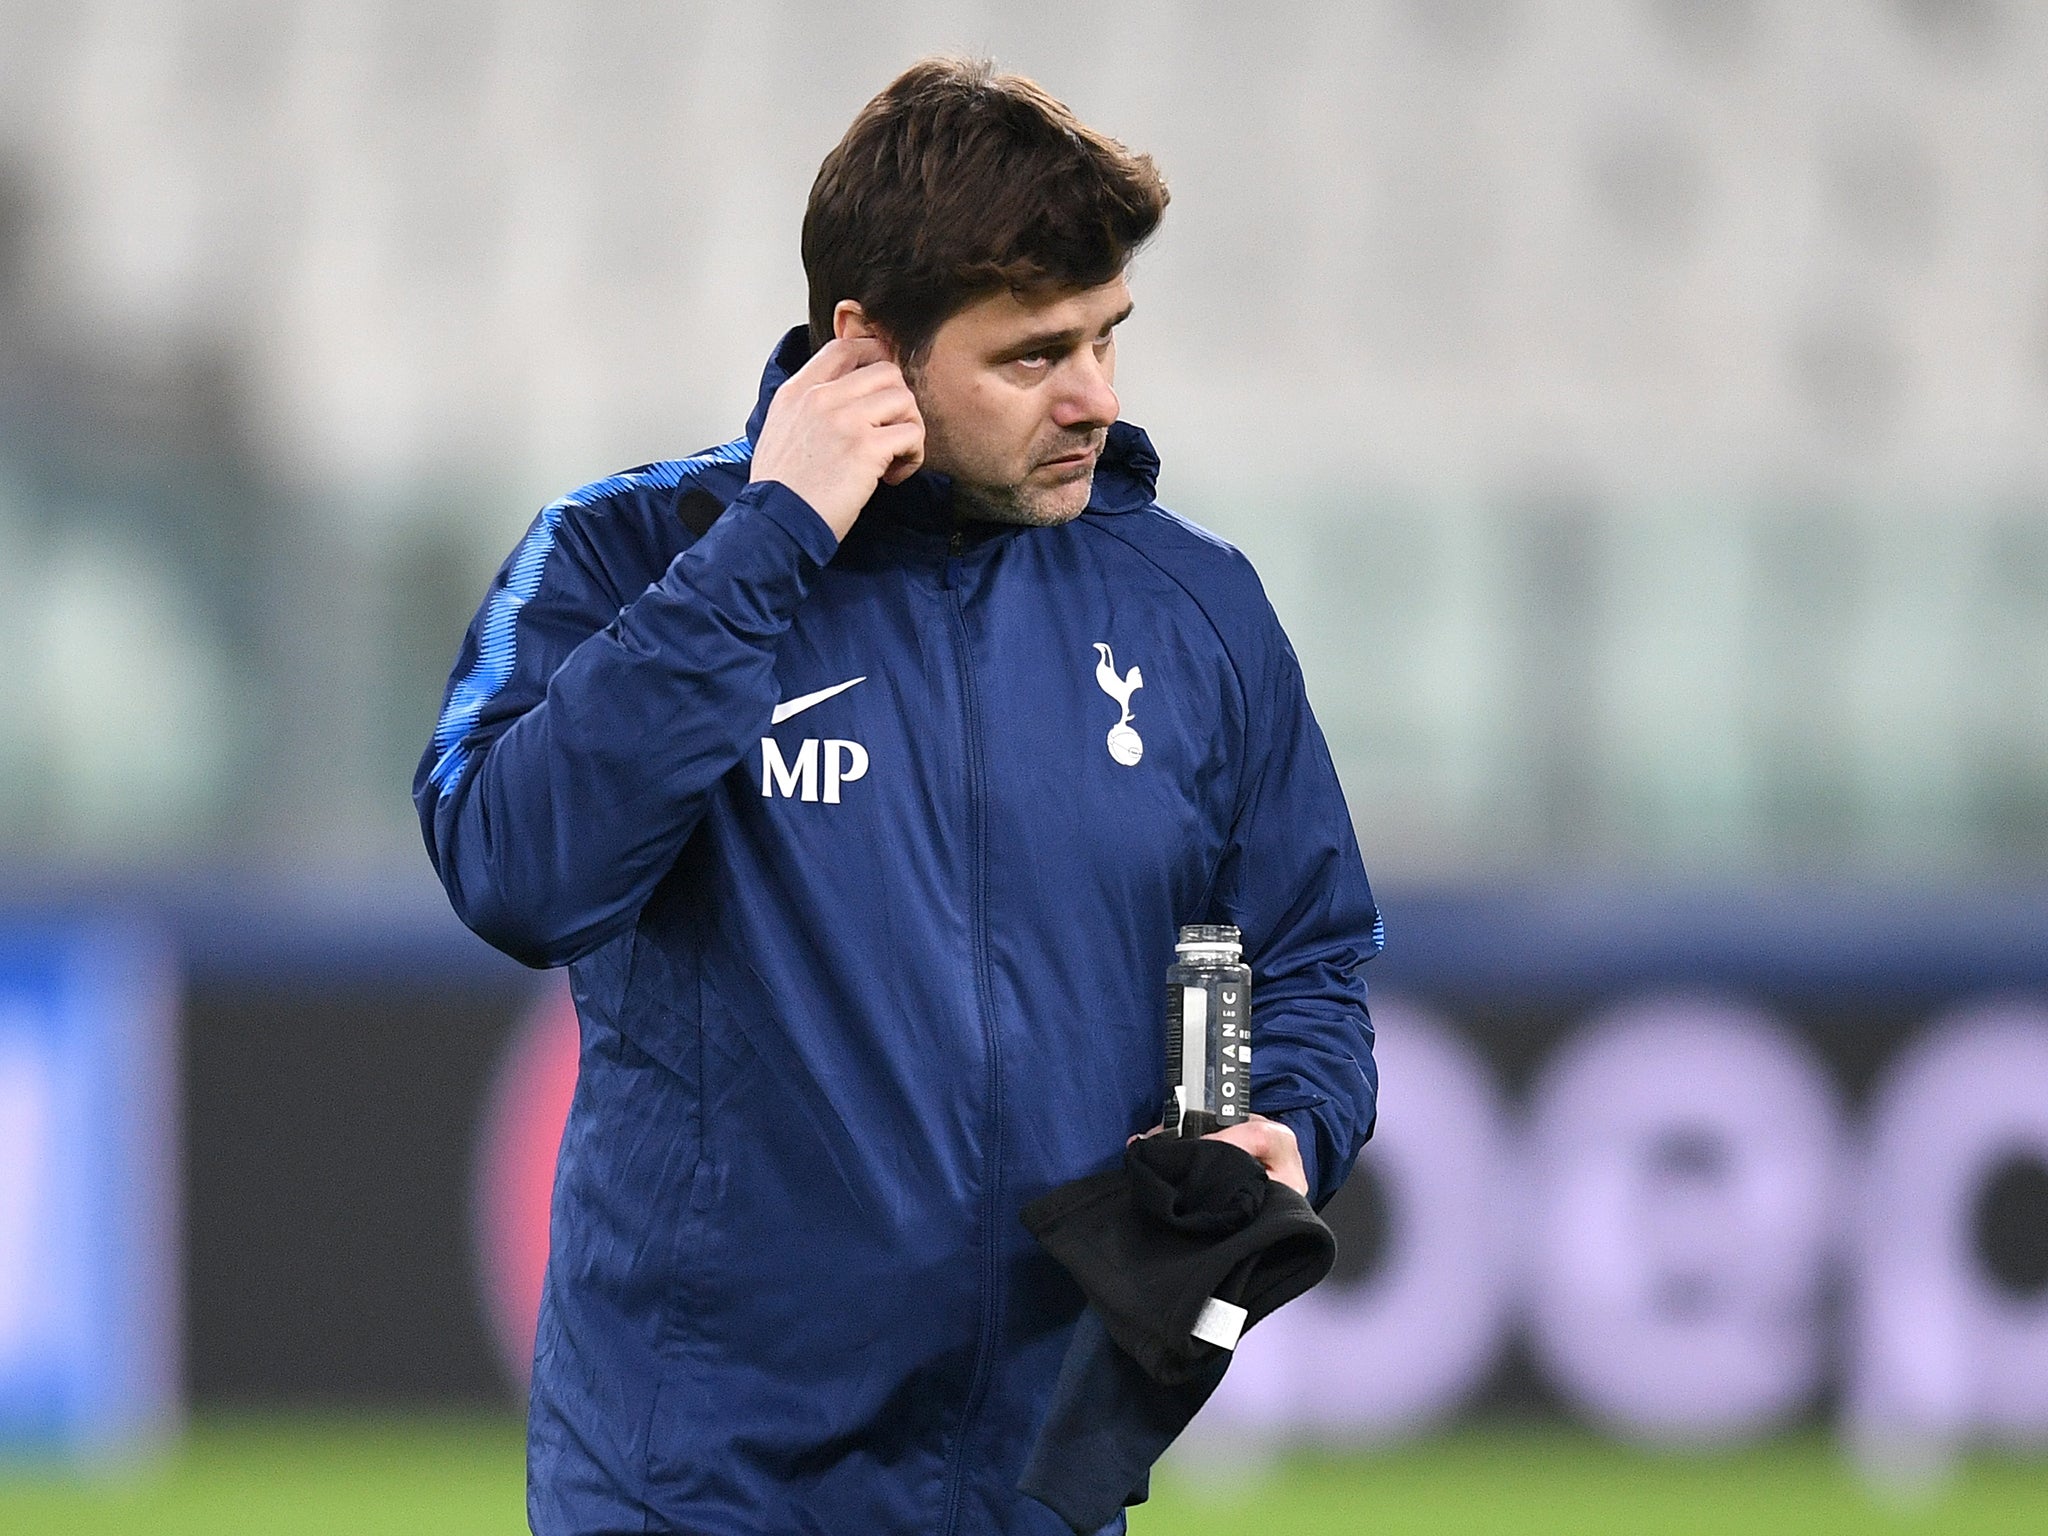 Mauricio Pochettino was a relieved man after seeing his side draw 2-2 in their FA Cup clash with Rochdale